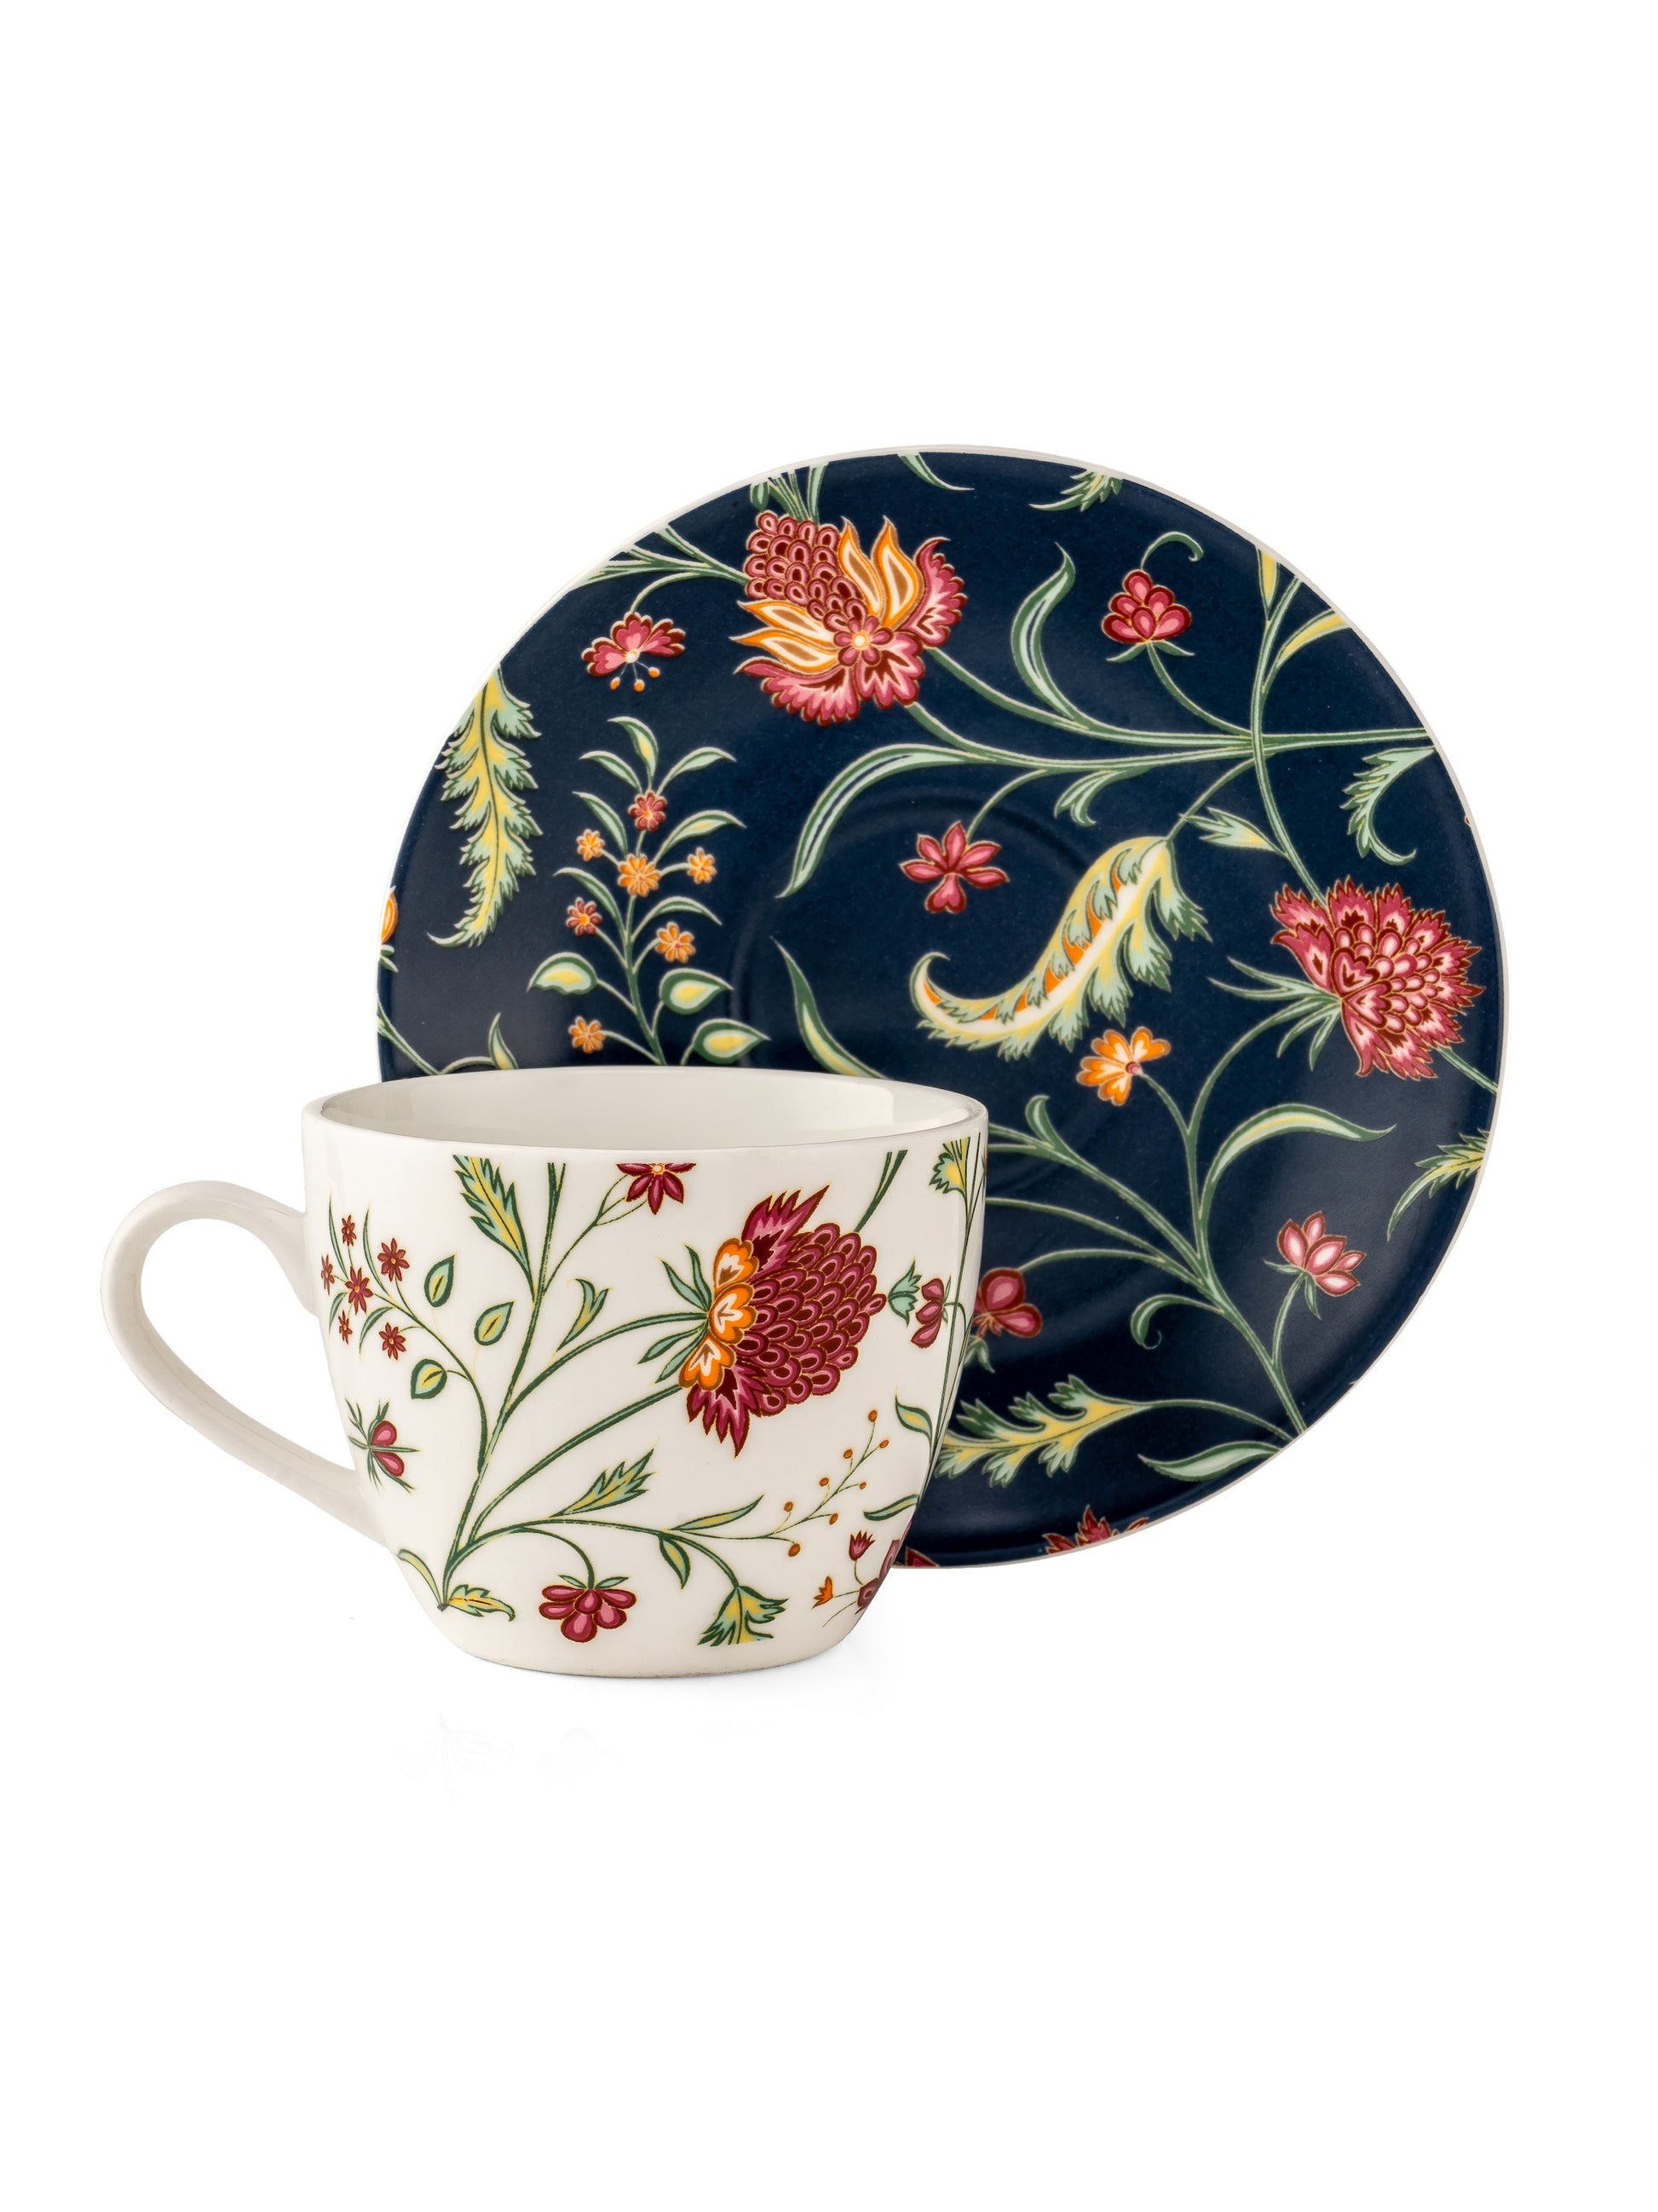 Buy JCPL Cream Cup & Saucer Set of 12 (6 Cups + 6 Saucer) GS302 Online at  Affordable Price – Clay Craft India